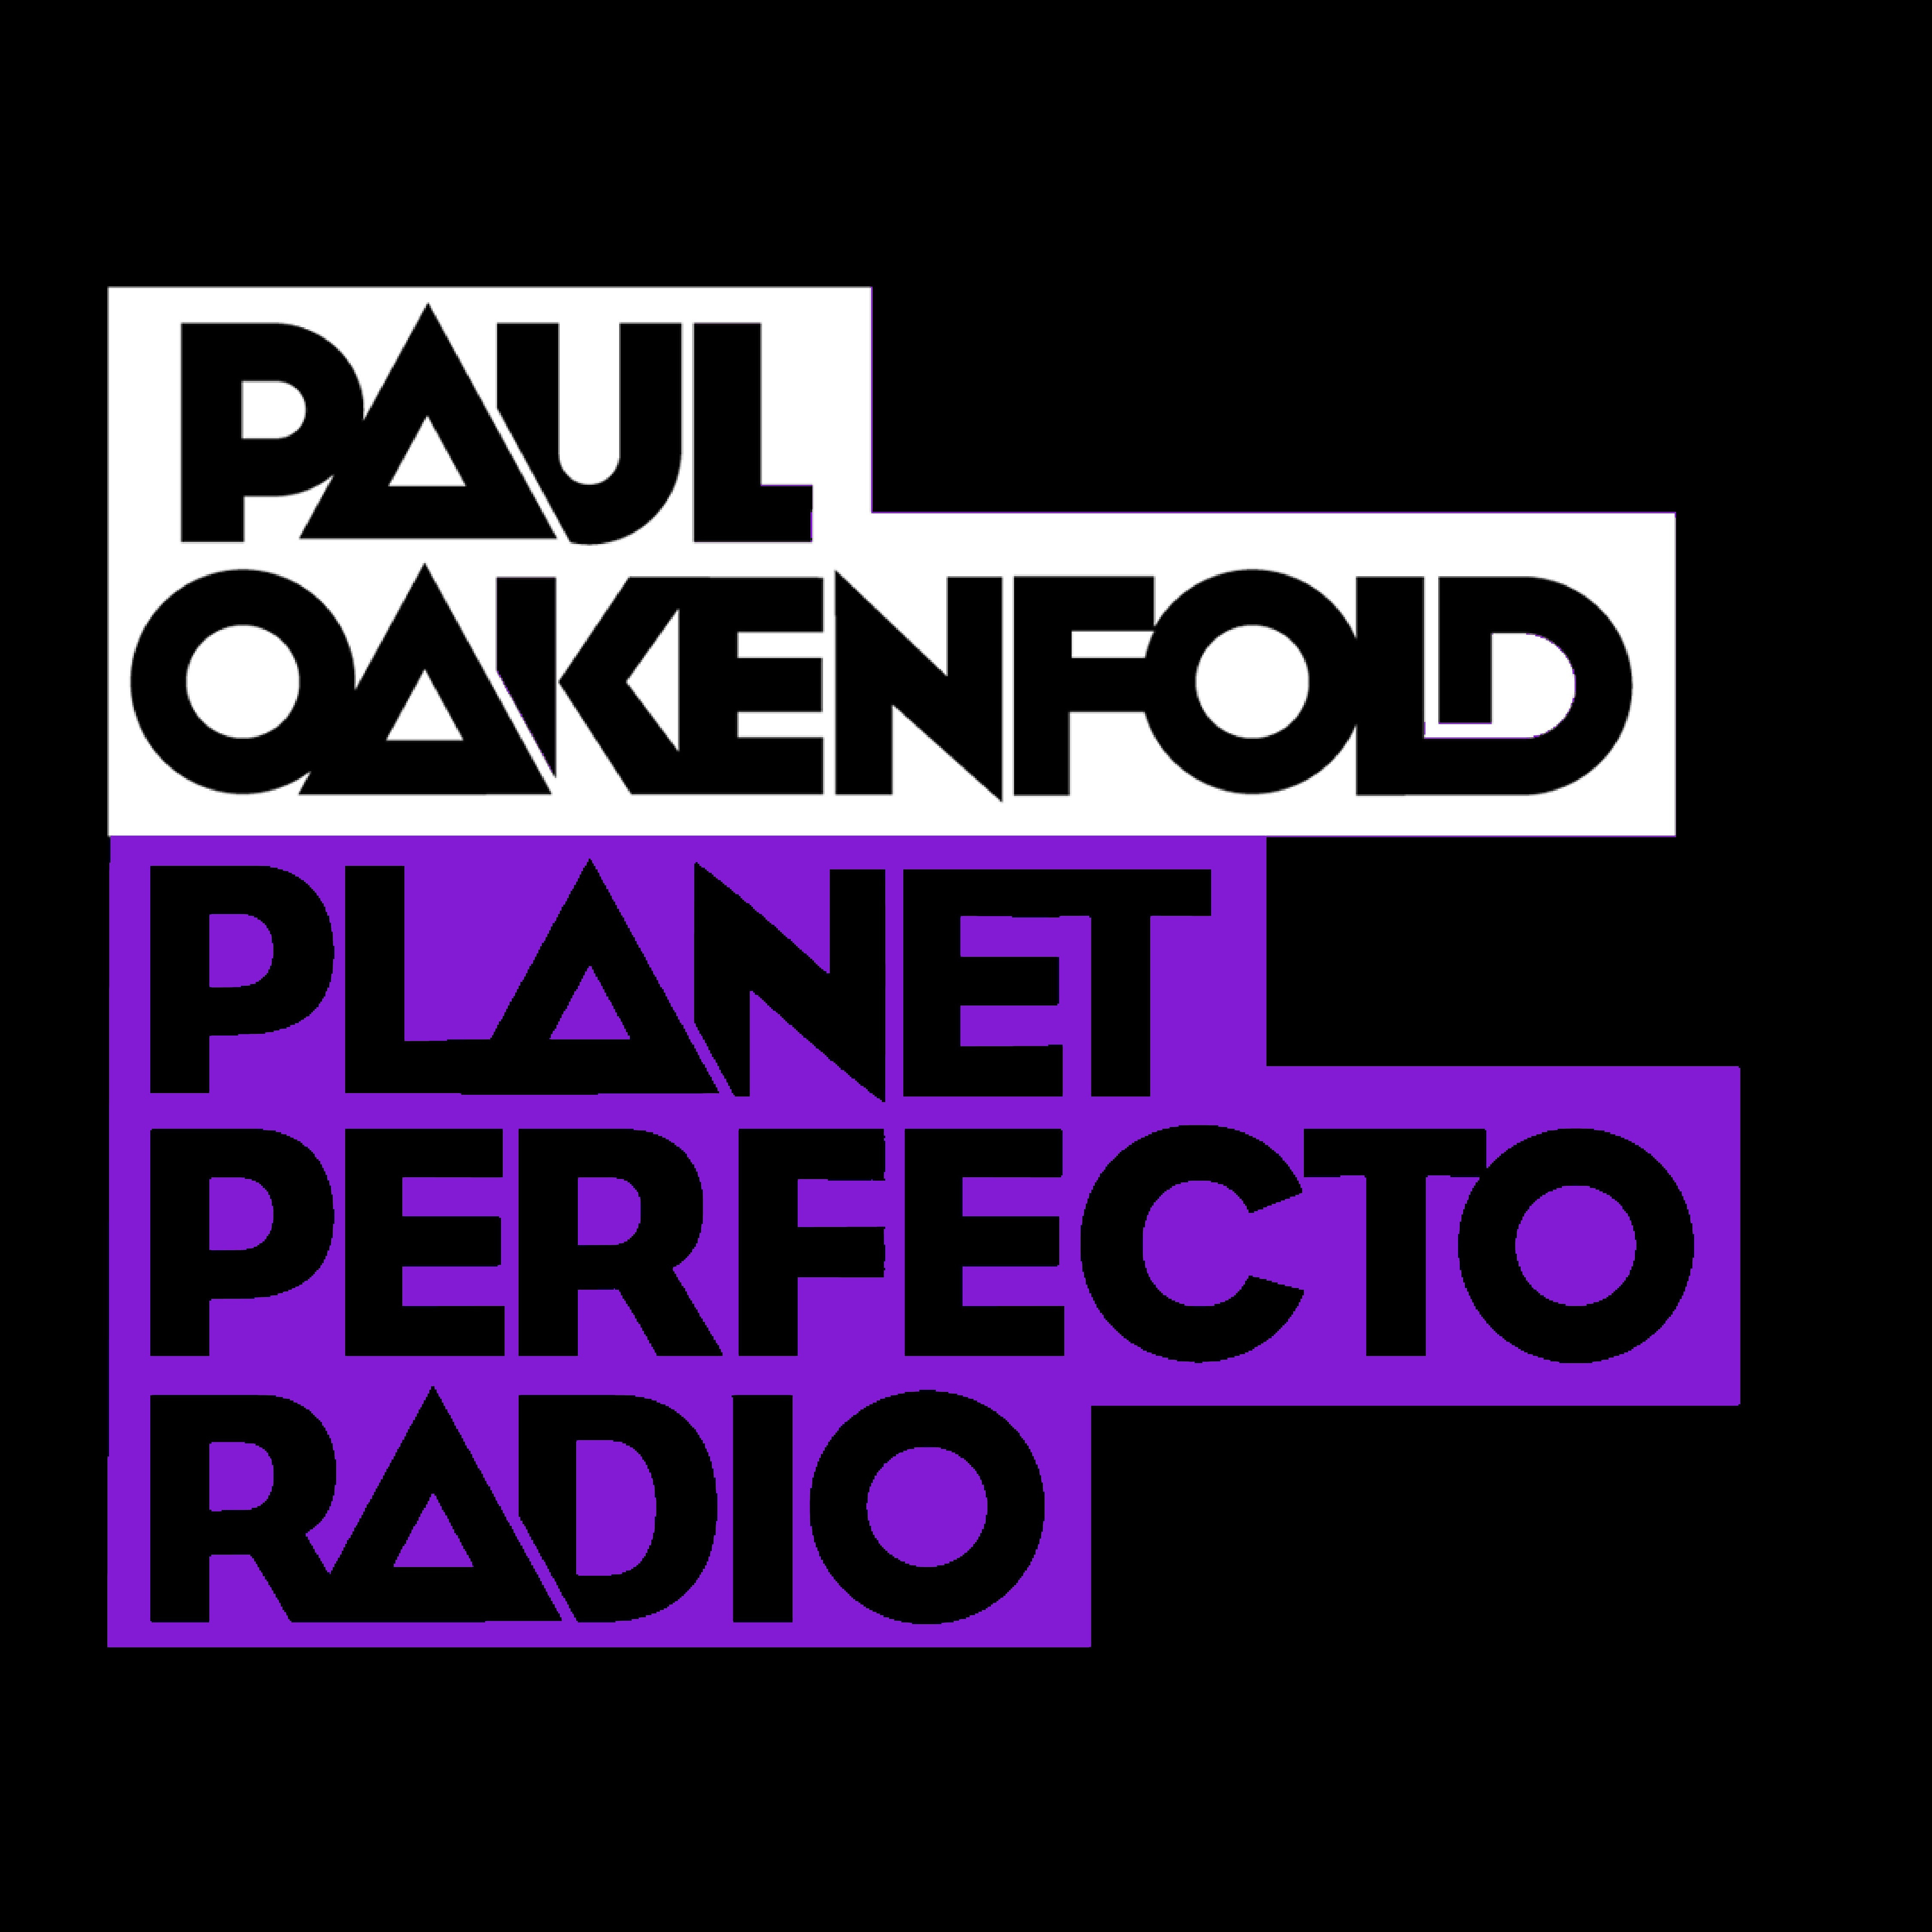 Planet Perfecto 580 ft. Paul Oakenfold